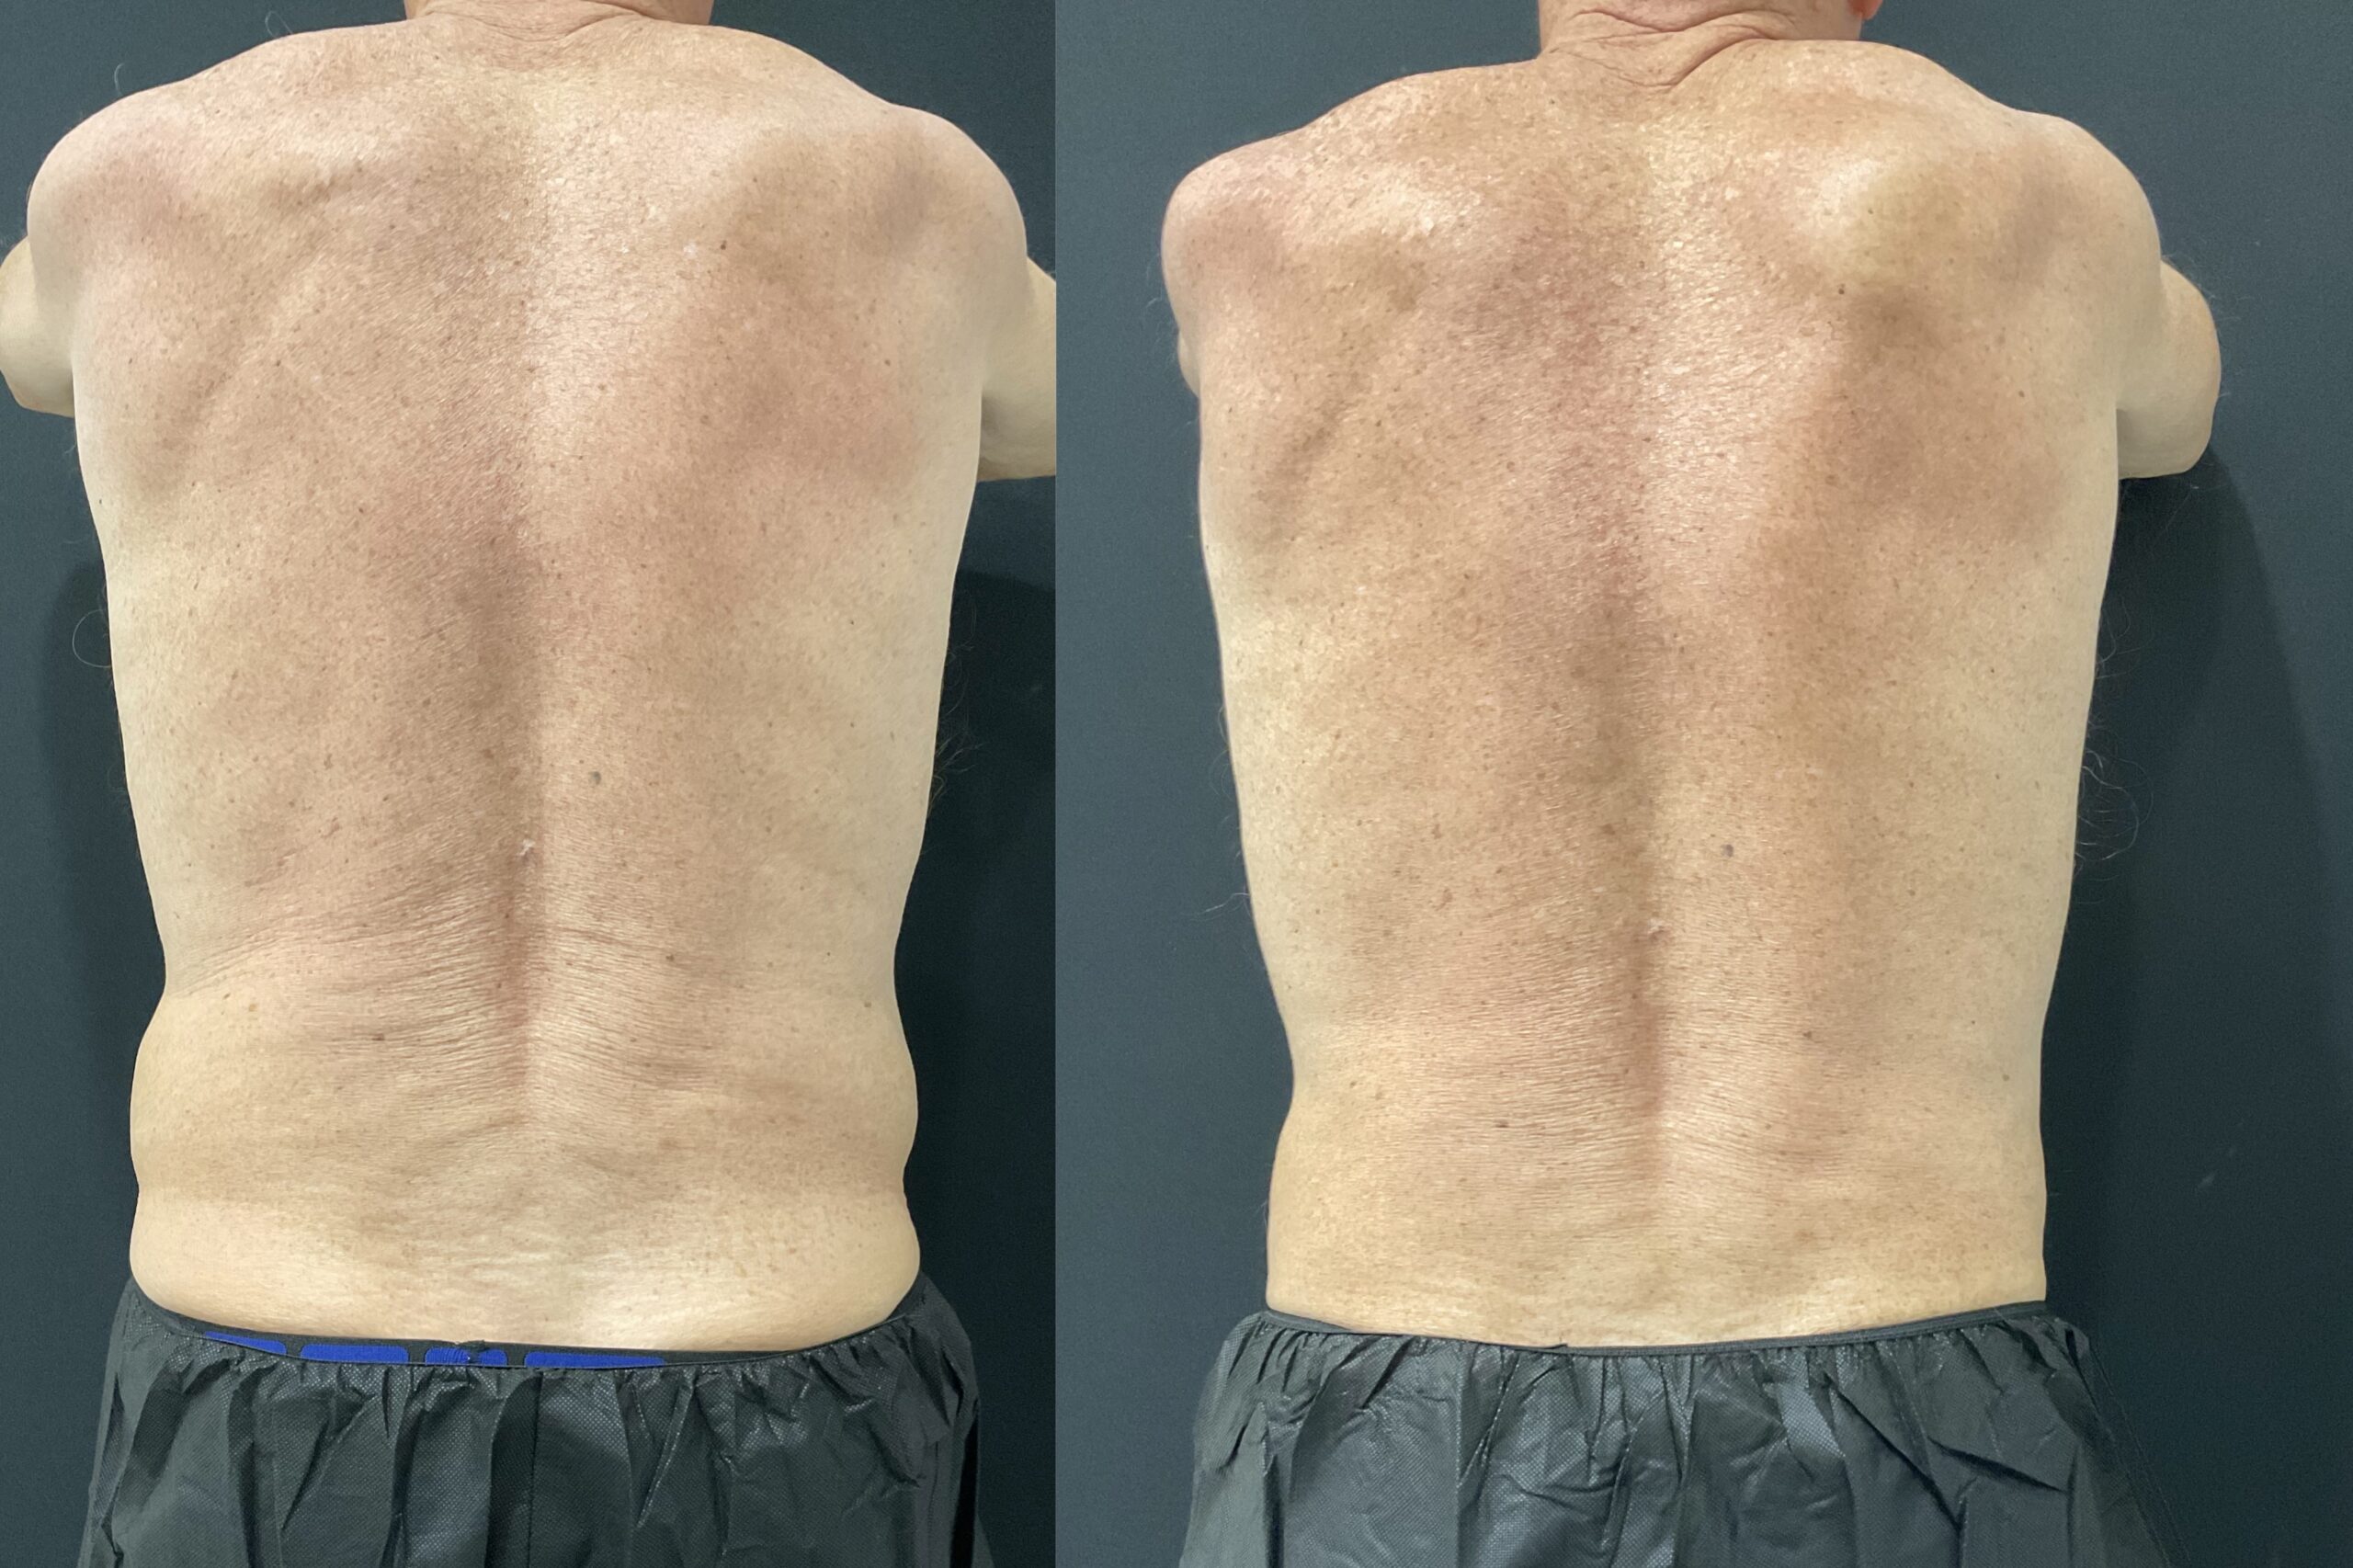 Reduce Back Fat with CoolSculpting